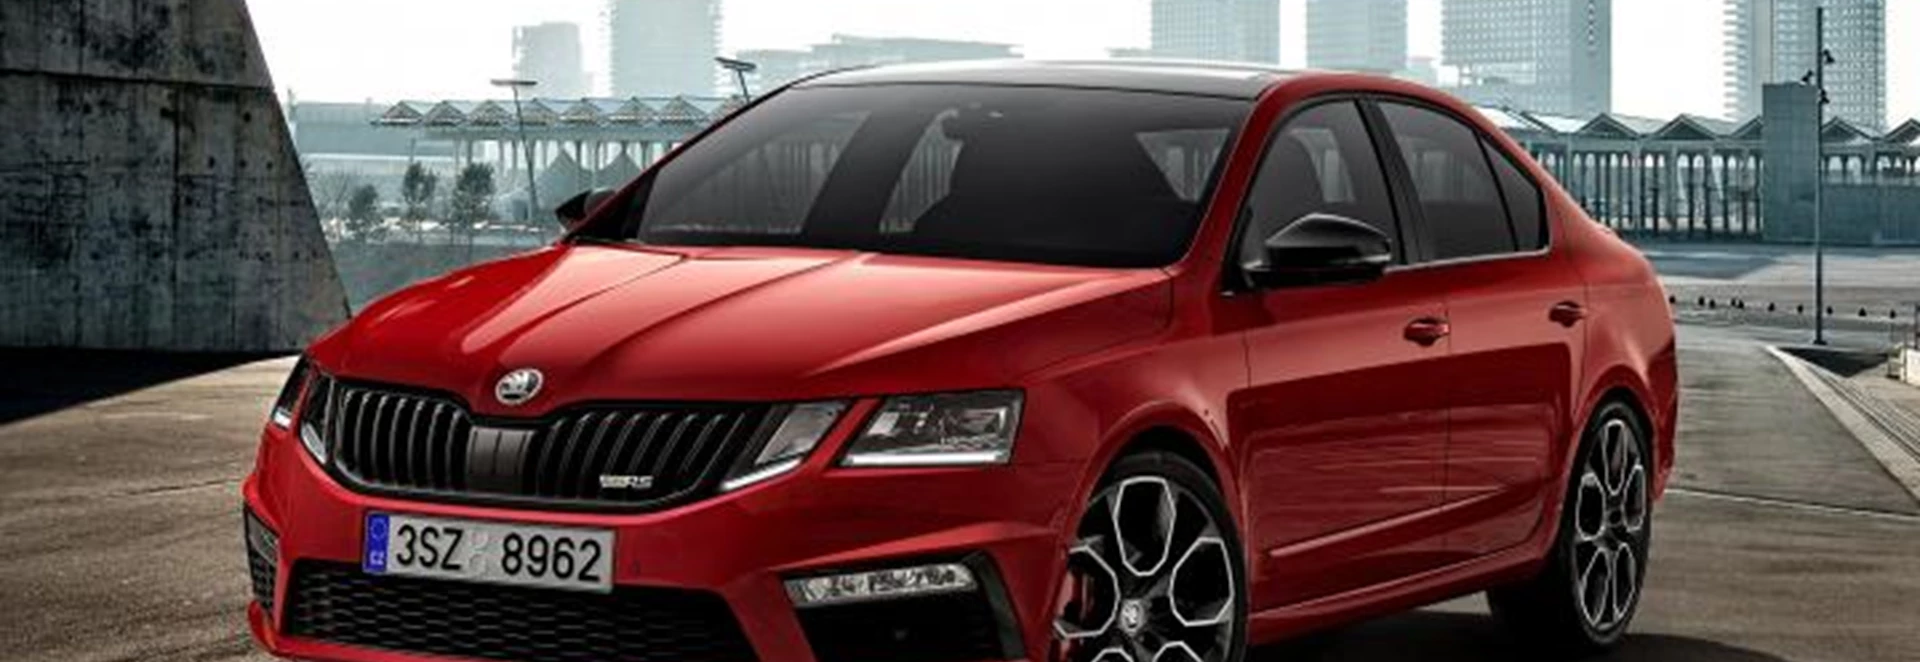 The most powerful Skoda Octavia vRS ever has just been unveiled